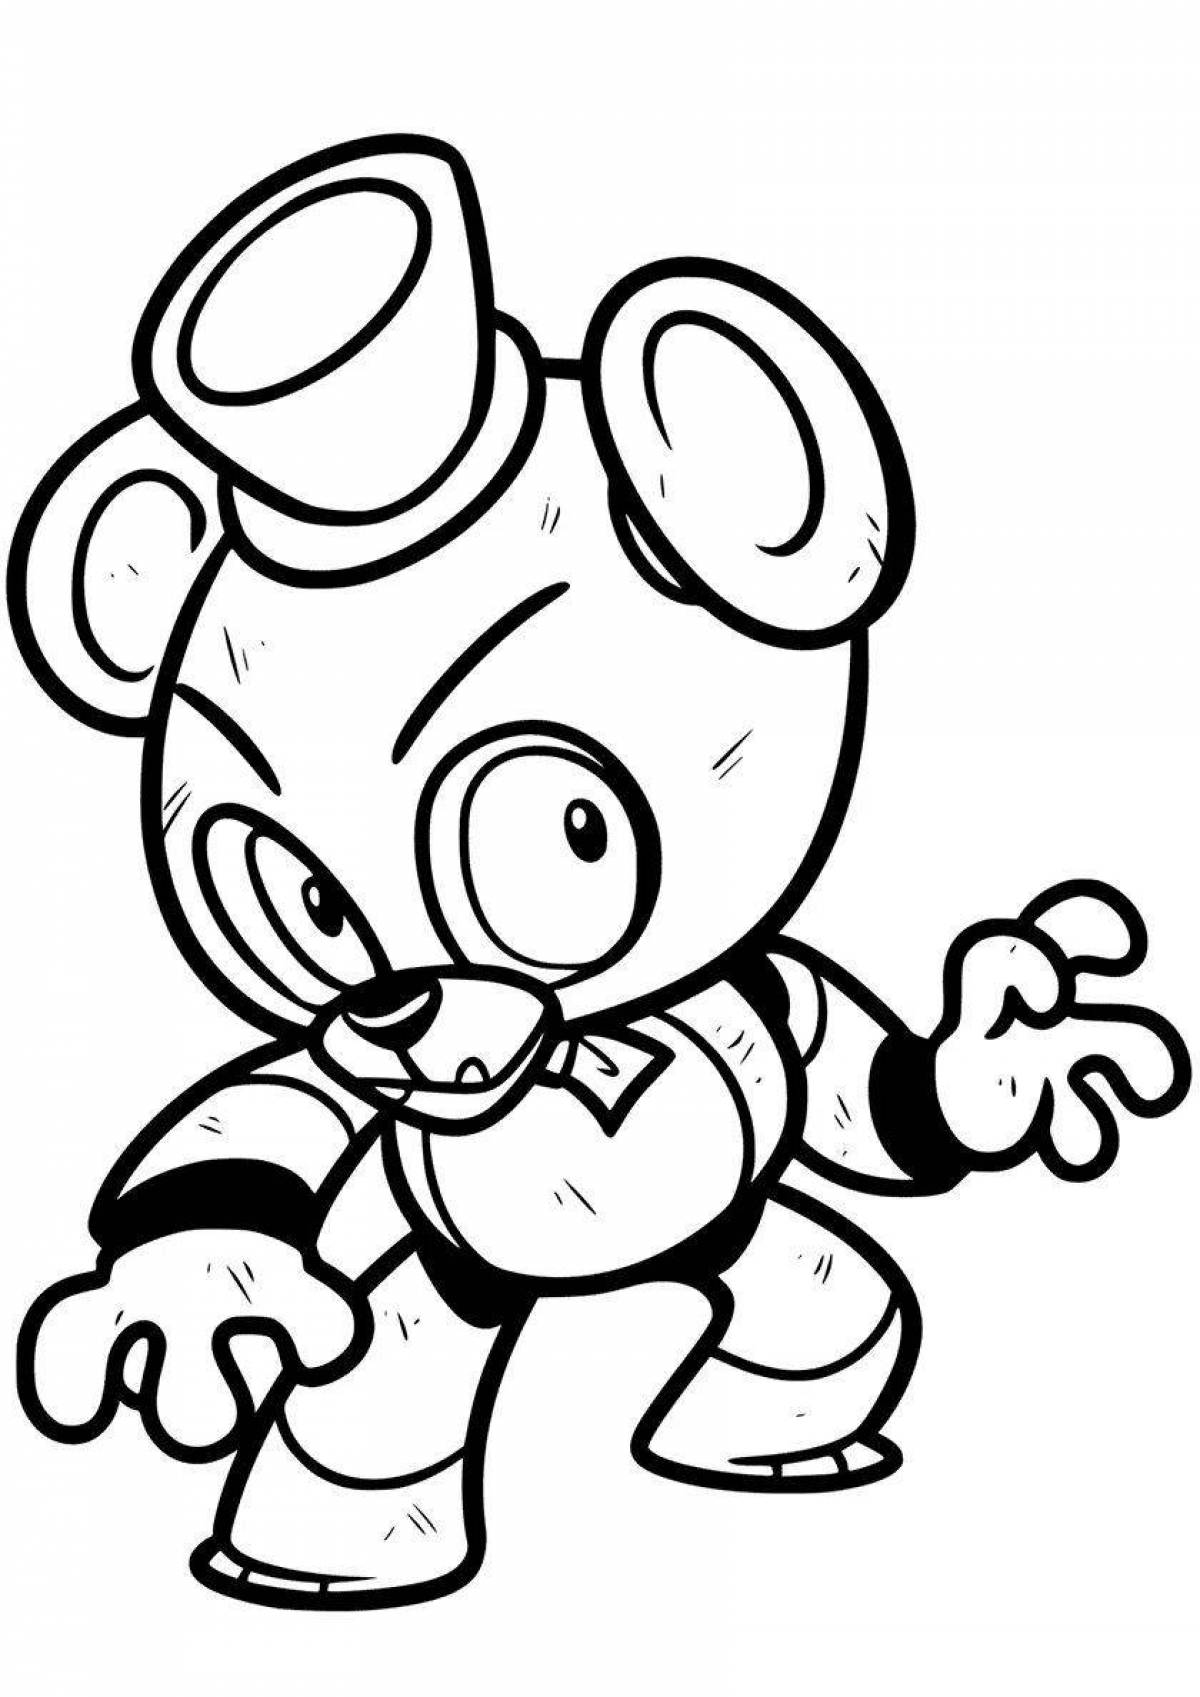 Glorious fnaf coloring page